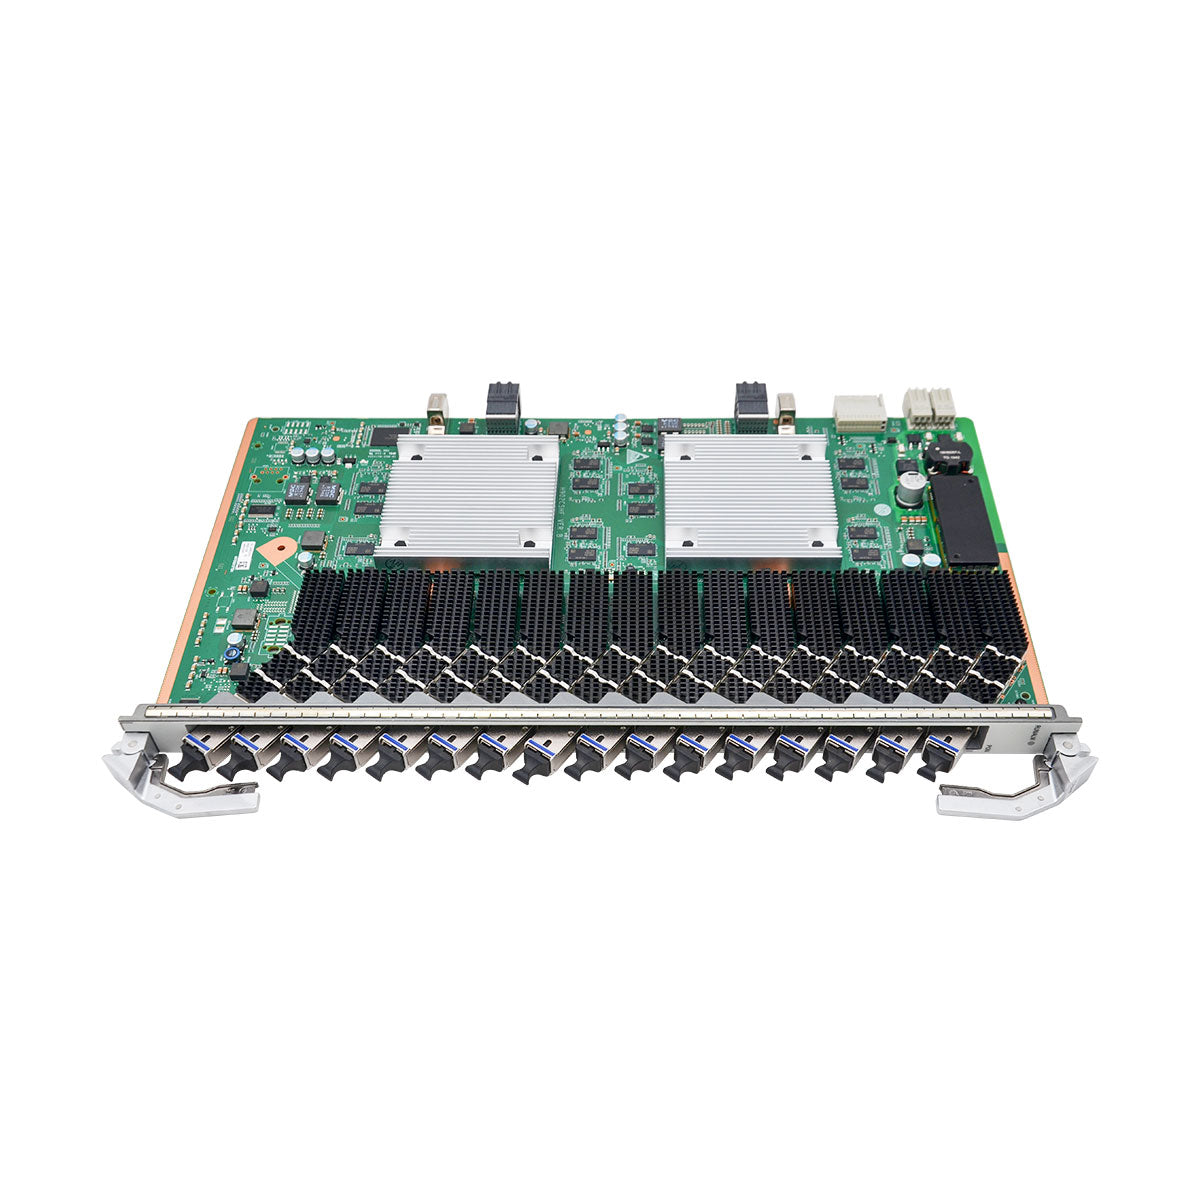 Huawei H901CSHF 16-port XGS-PON and GPON combo Board for MA5800 series OLT